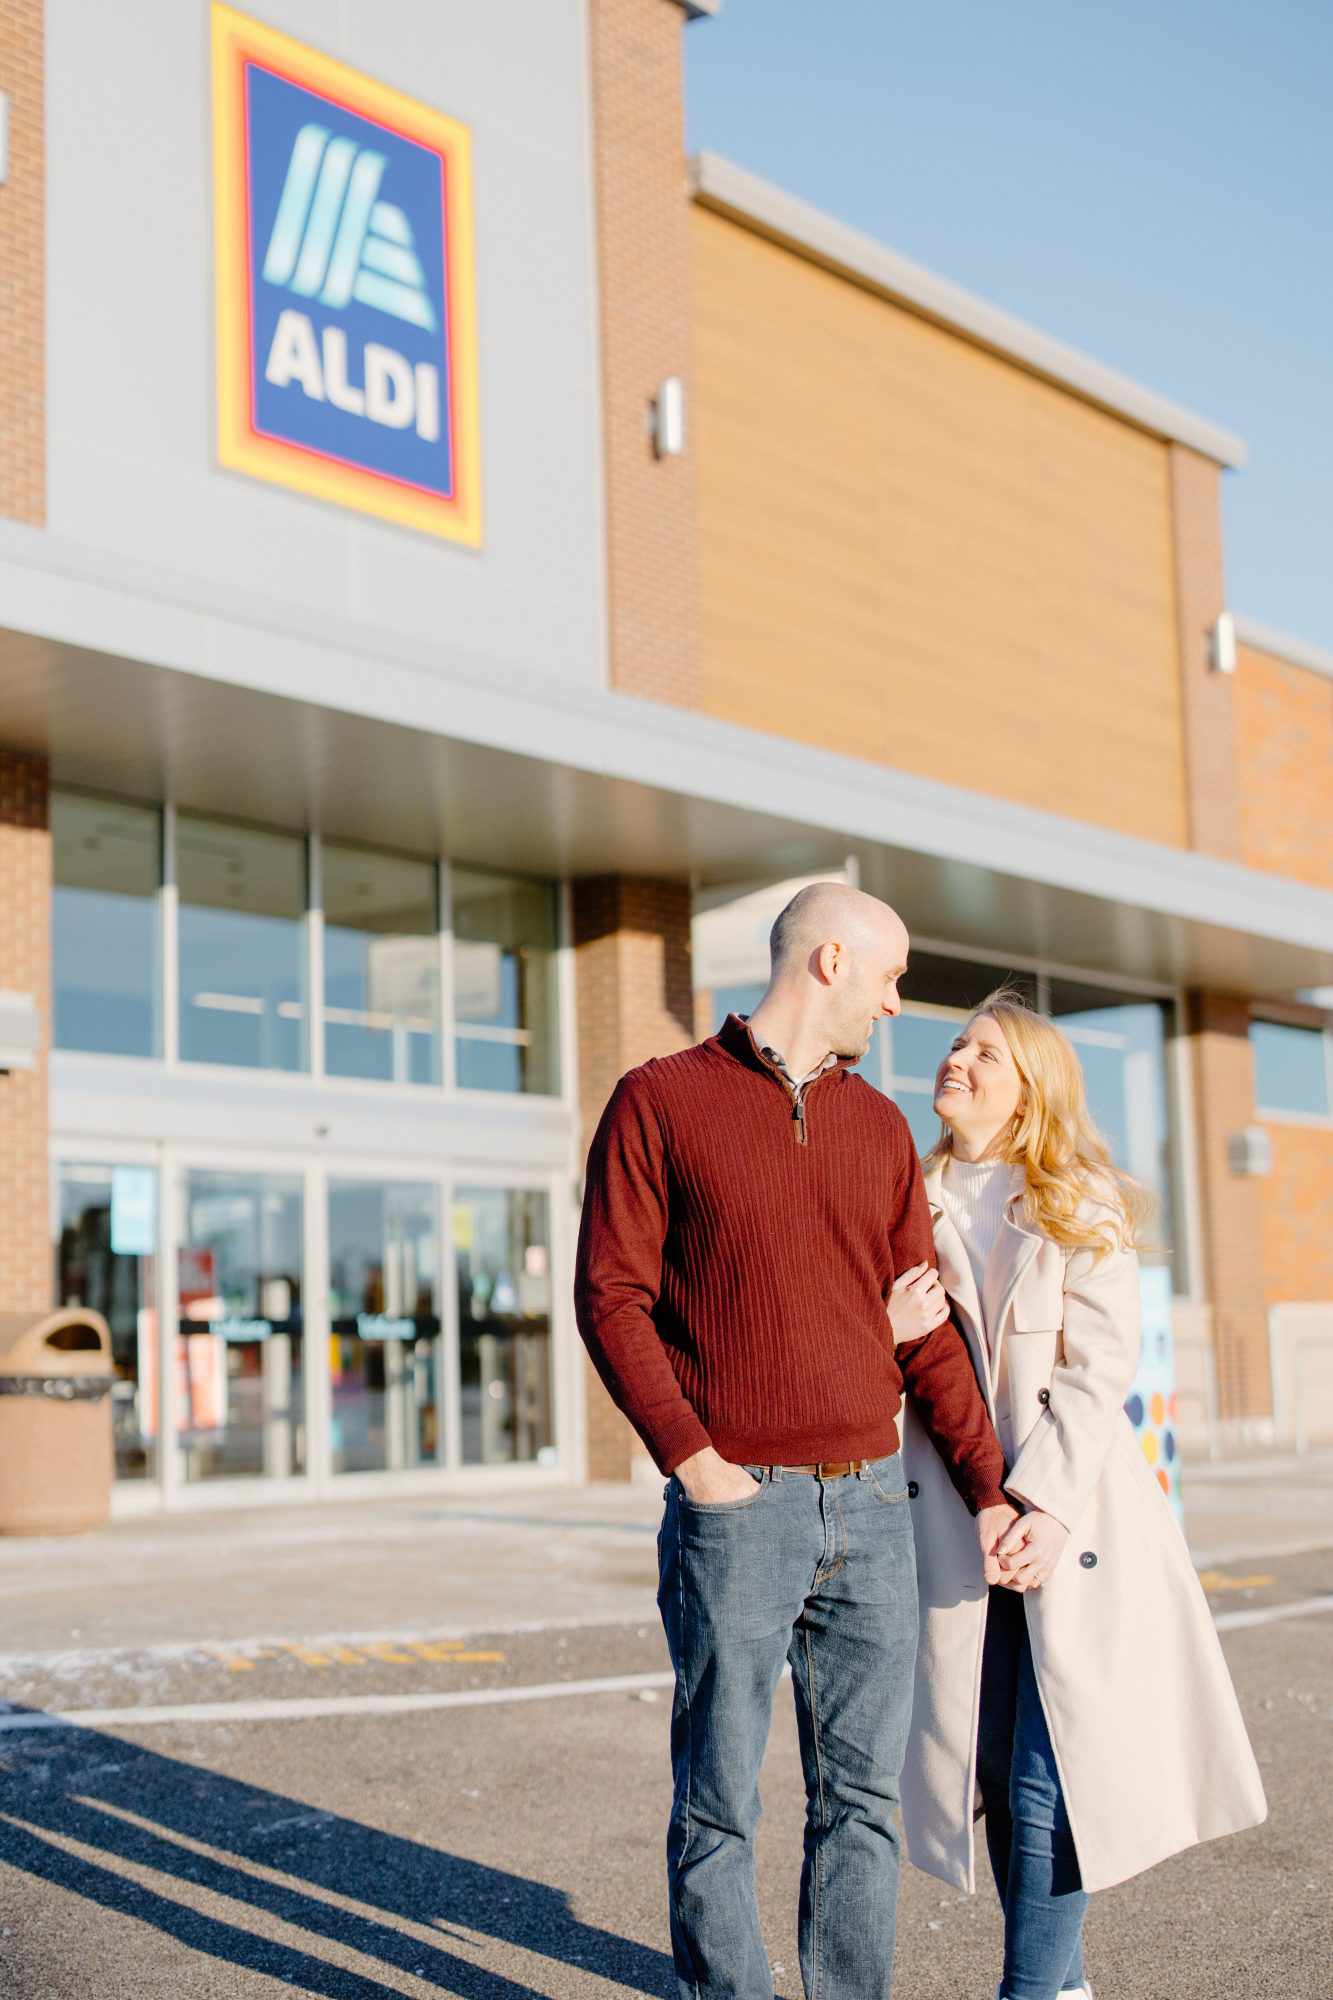 a man in a red sweater poses with a woman in a white coat in front of an Aldi store